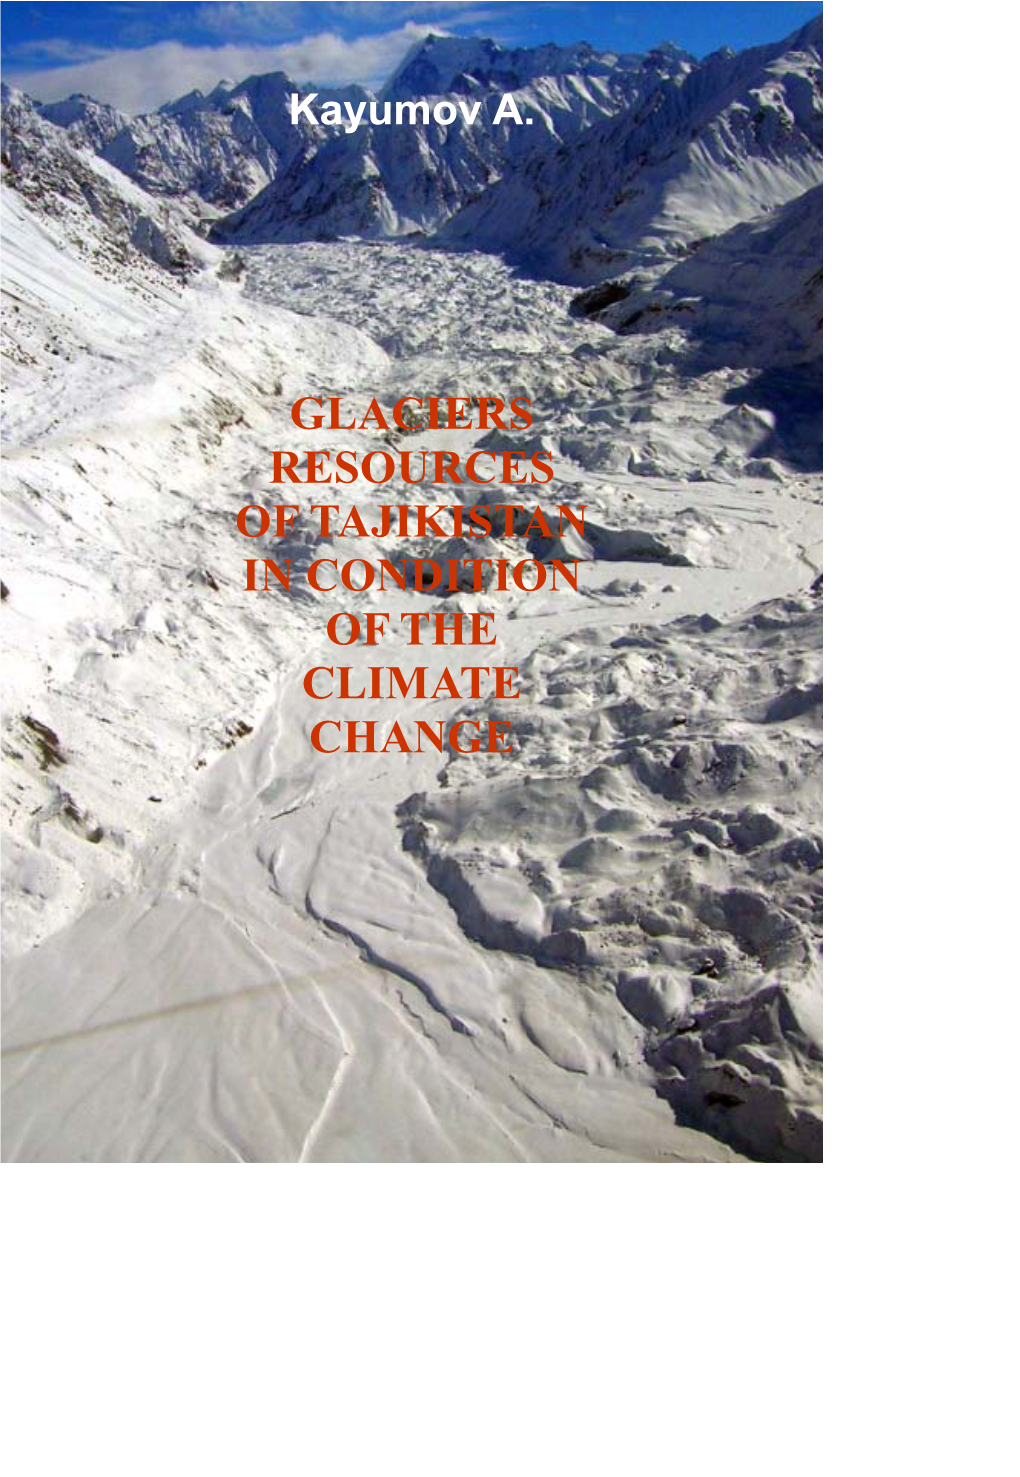 Glaciers Resources of Tajikistan in Condition of the Climate Change